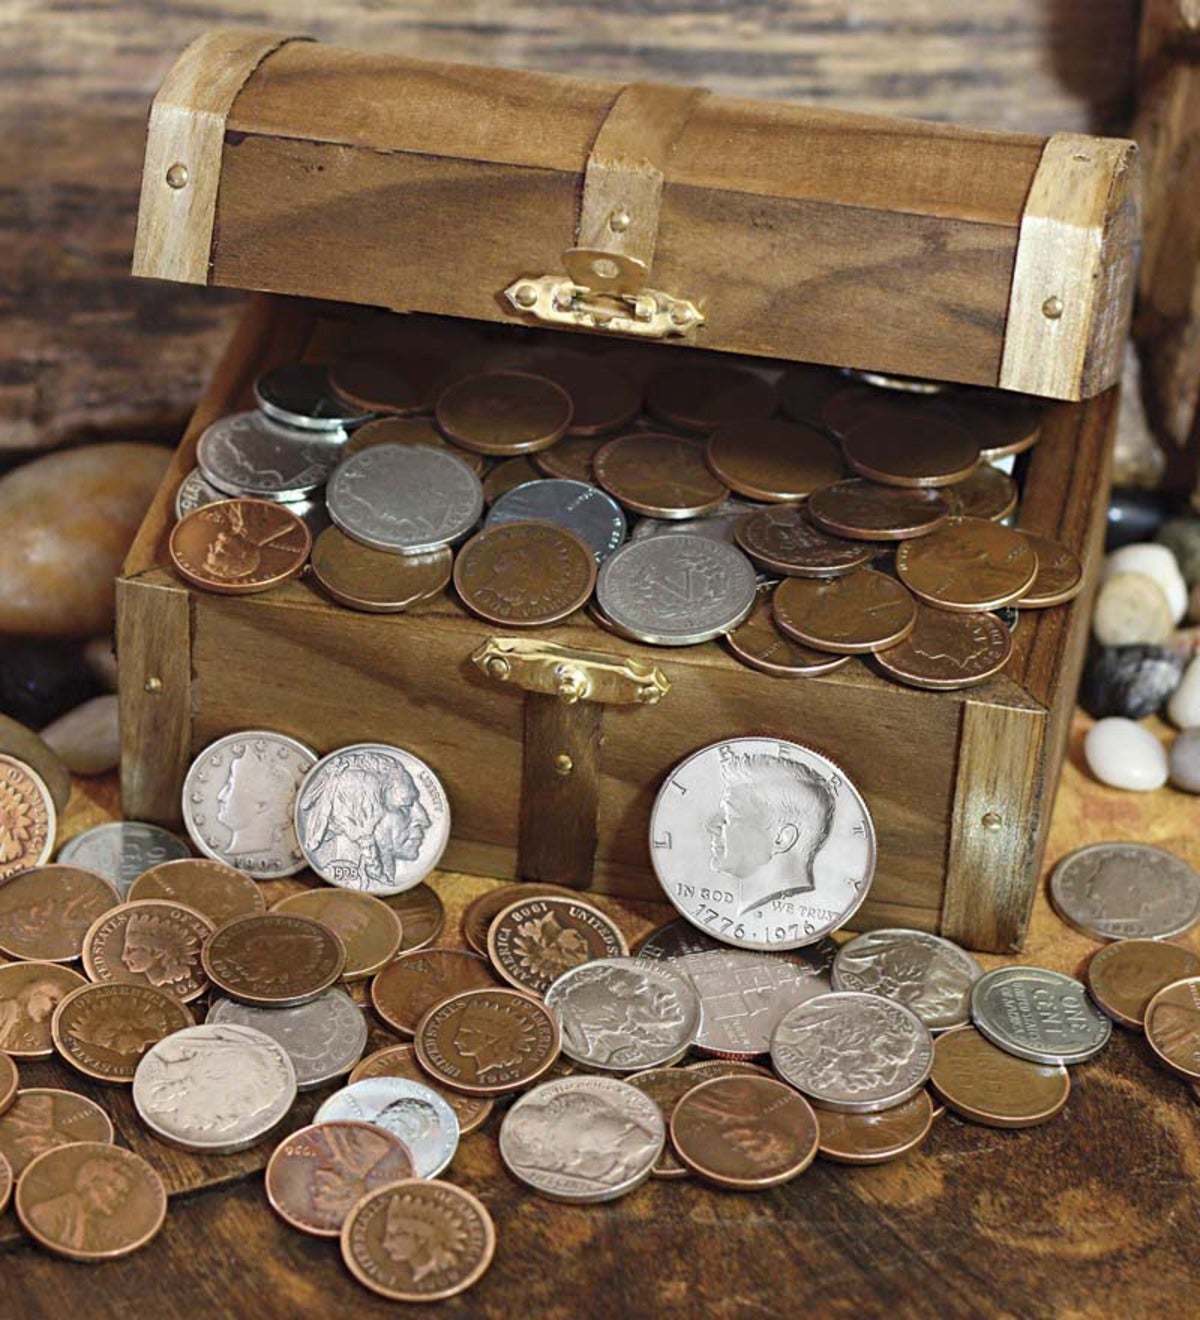 Historic Treasure Chest of Old & Rare Coins | Wind and Weather